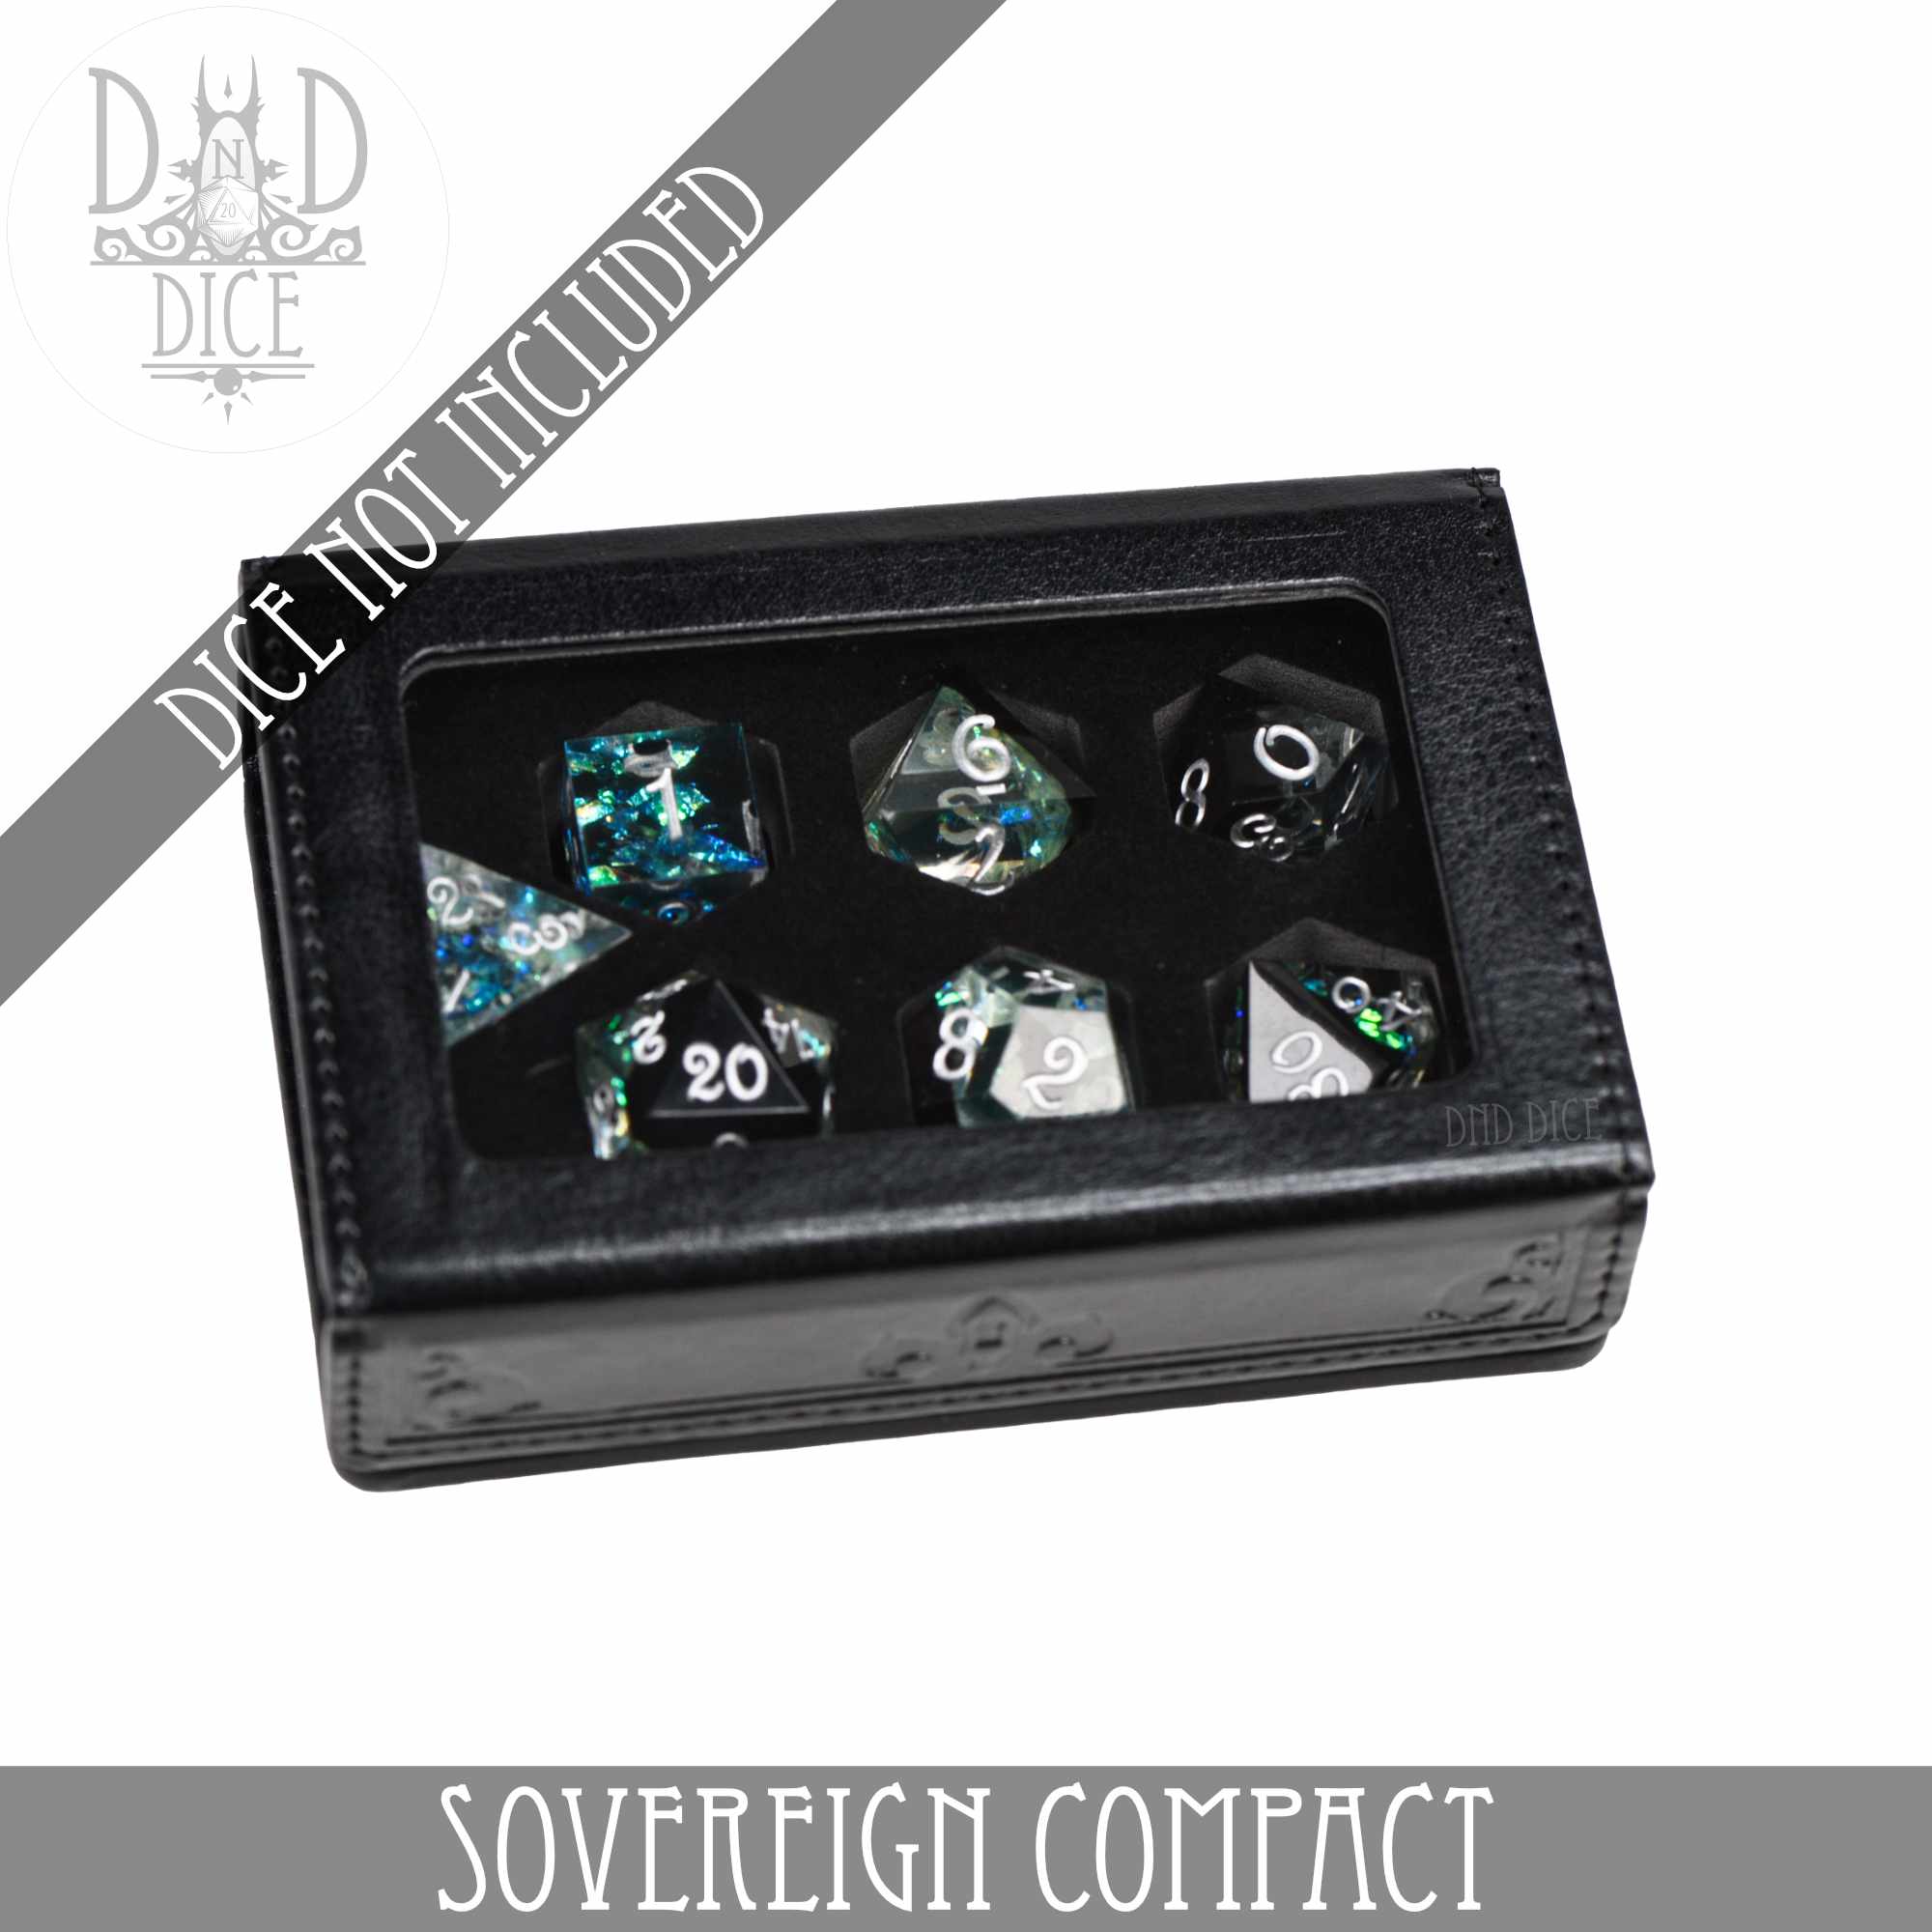 Sovereign Gift Box Packaging - 7 Dice Set